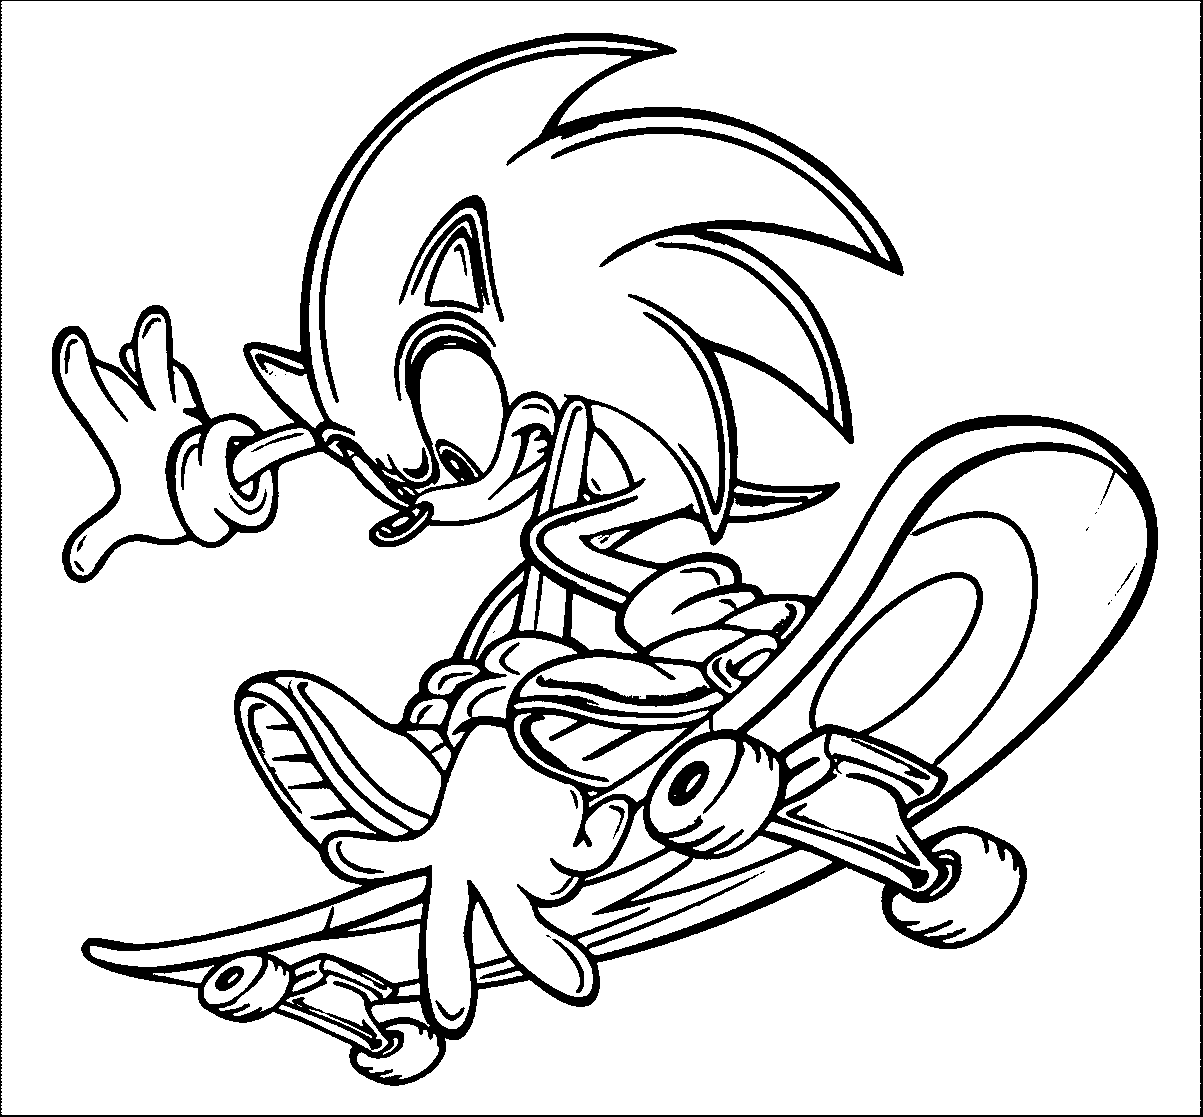 Sonic Skateboarding Coloring Page - Free Printable Coloring Pages ...